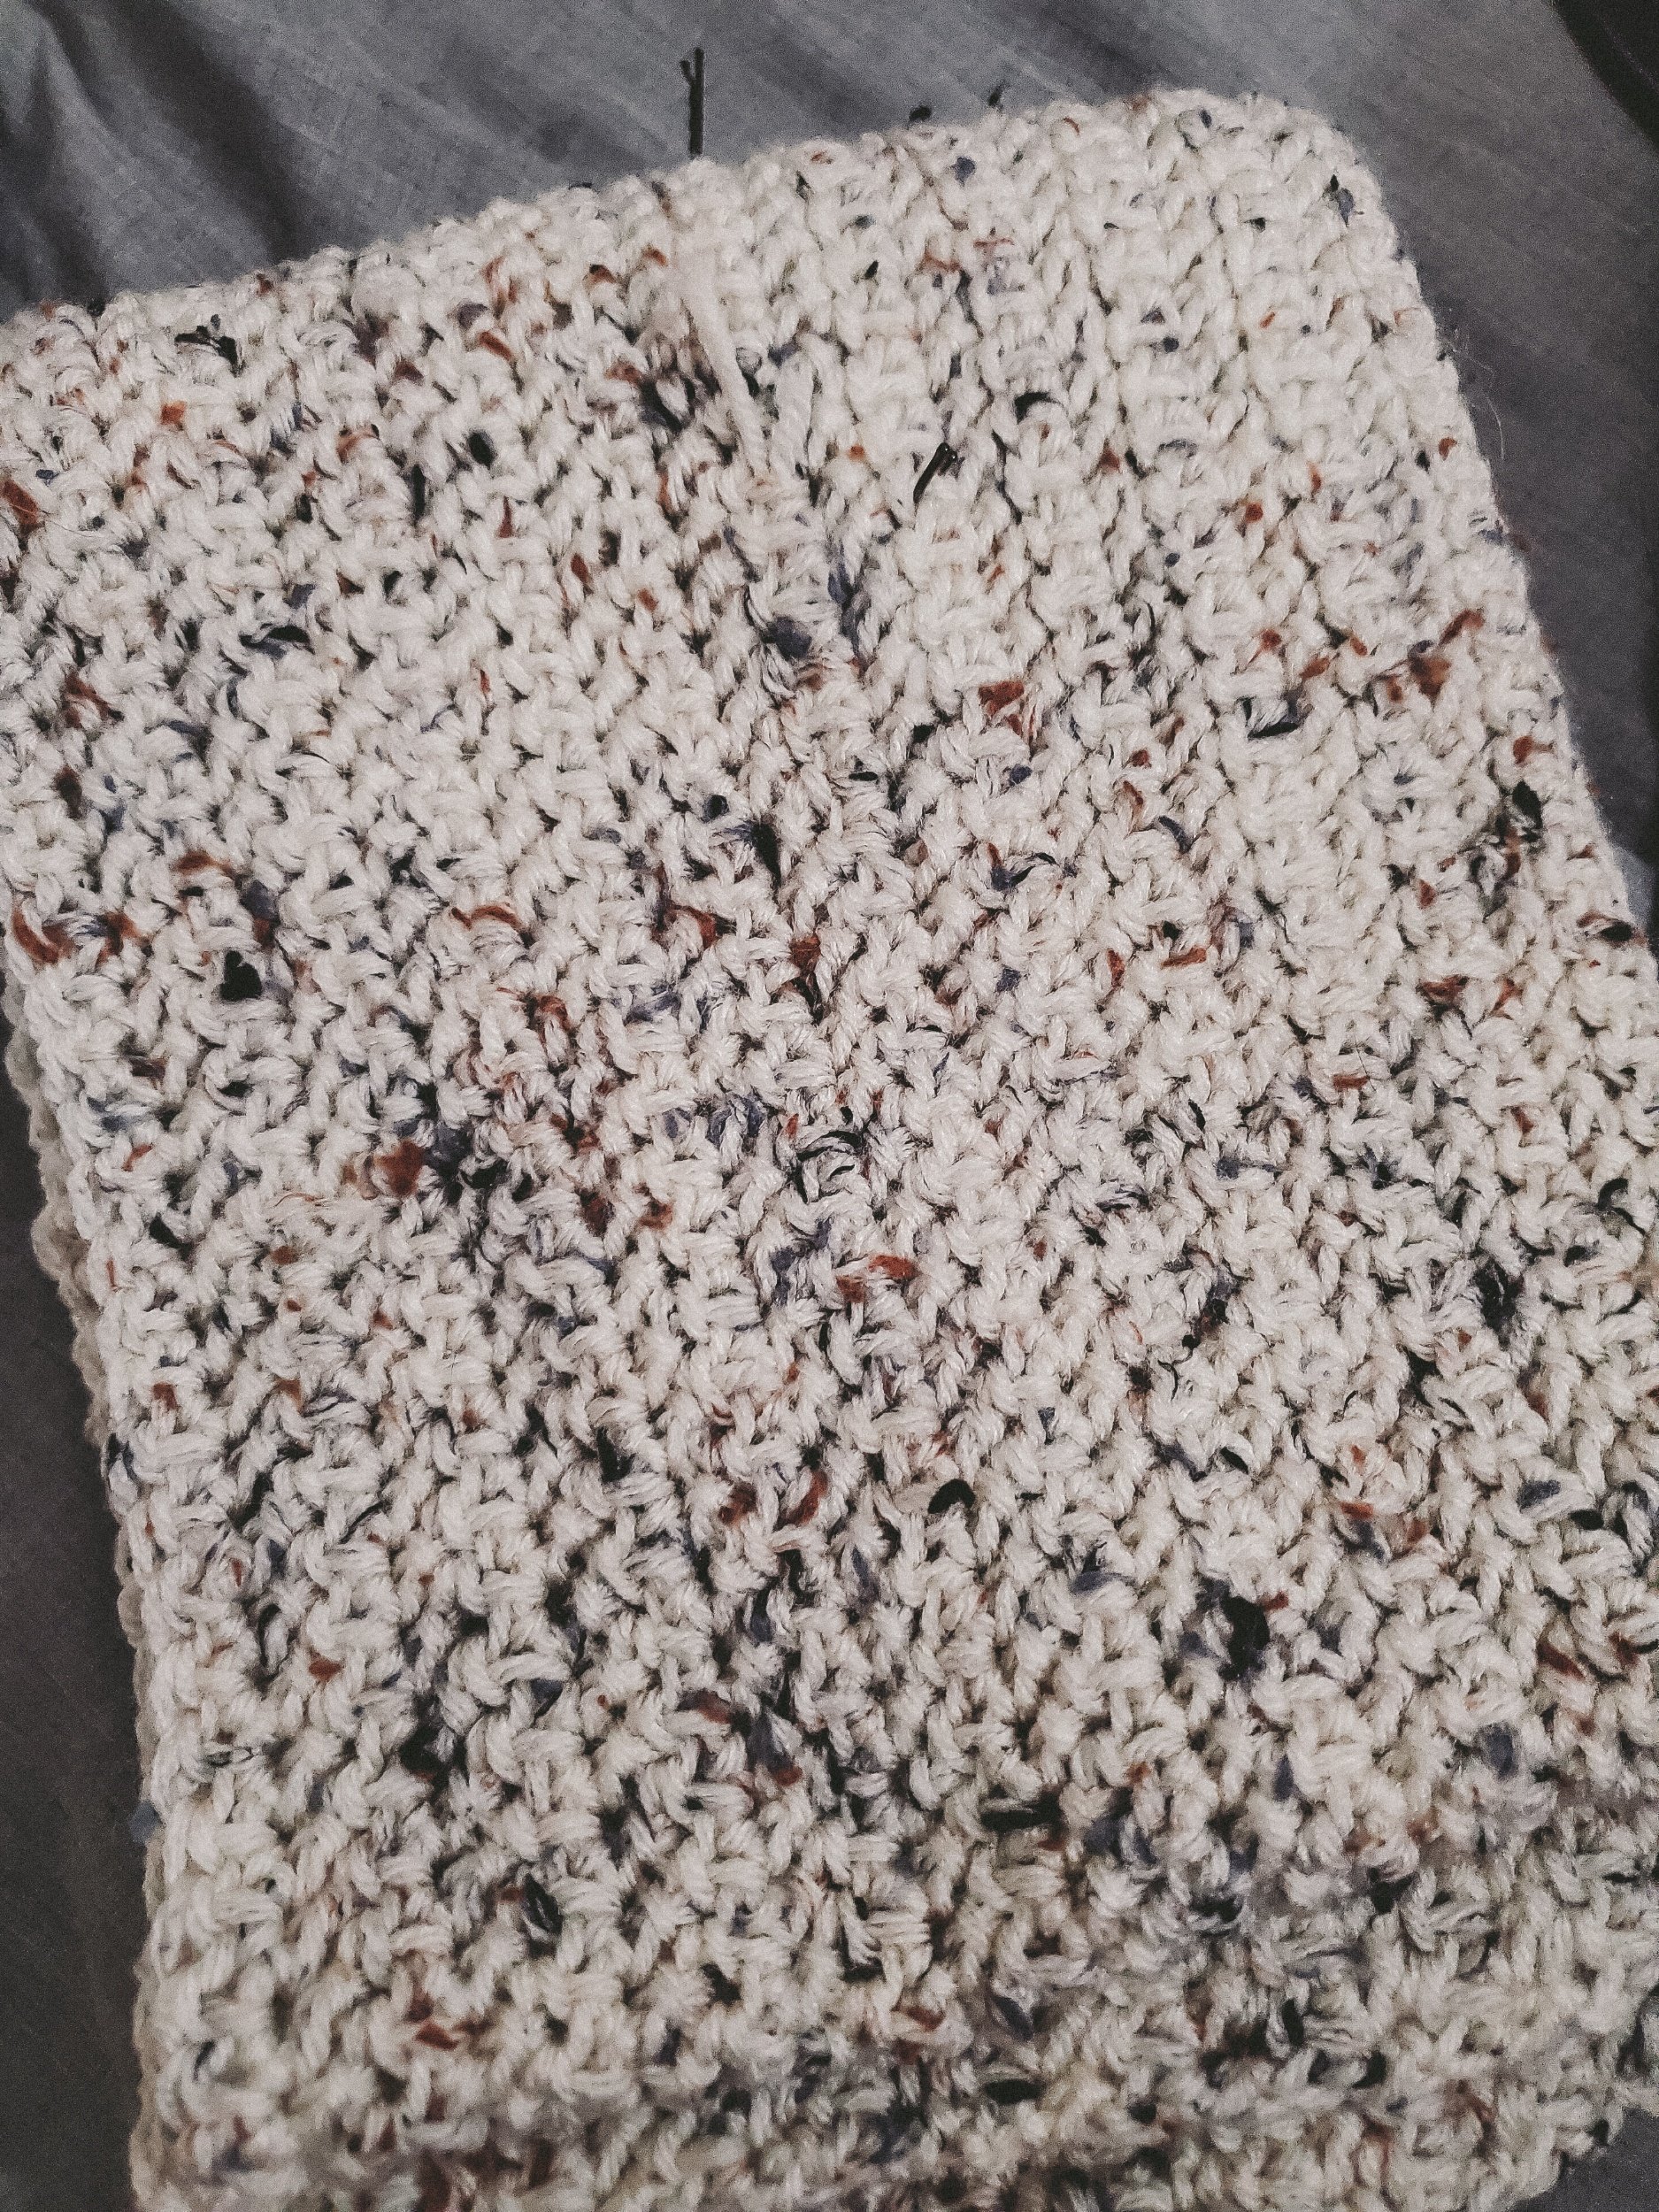 Started crocheting a blanket 